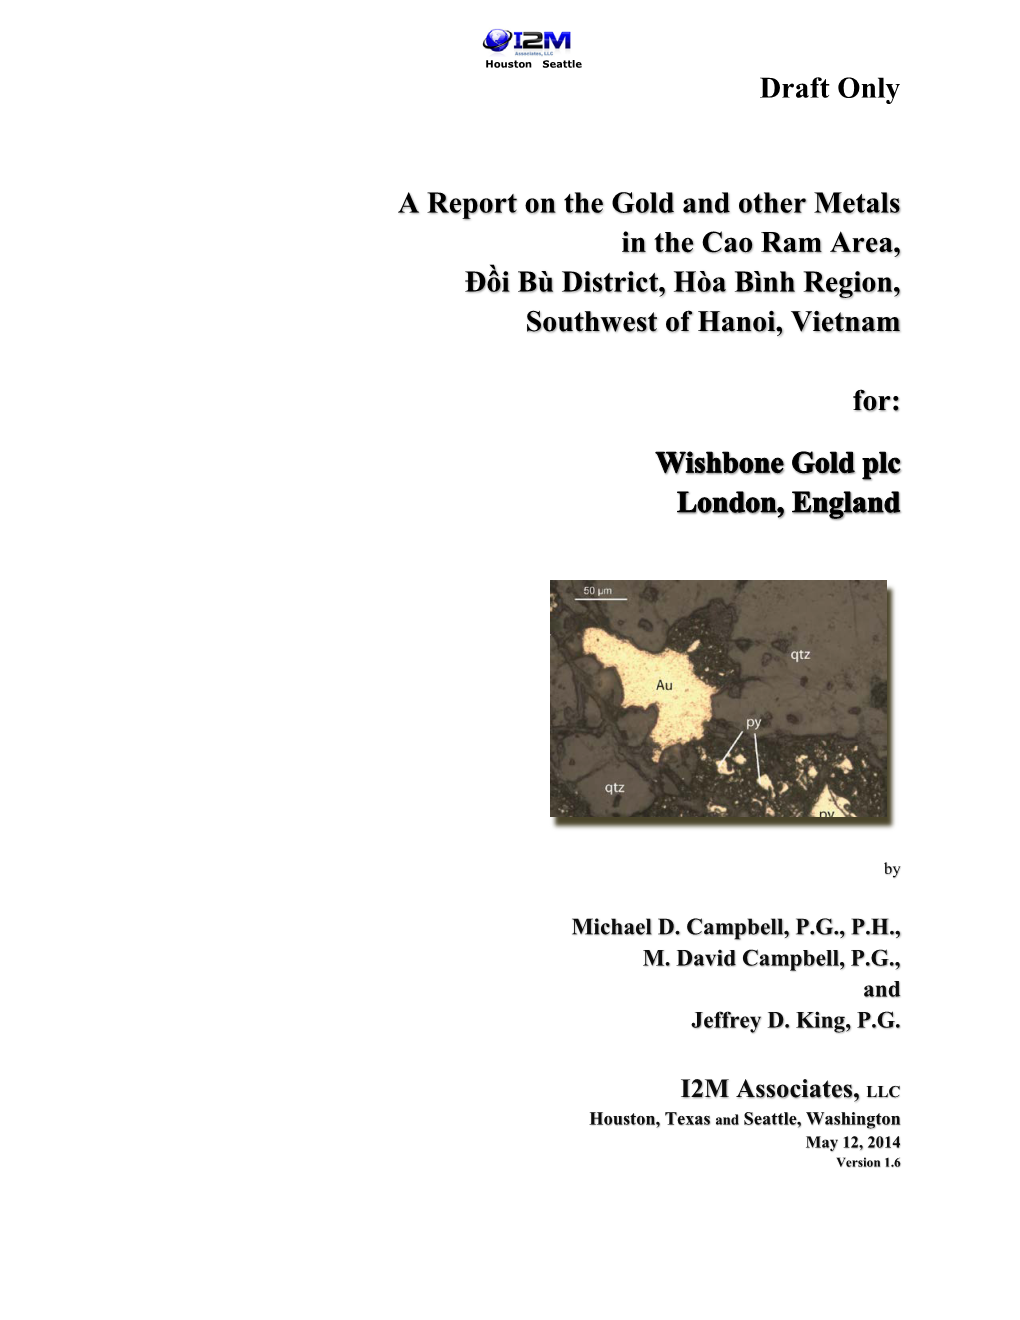 Draft Only a Report on the Gold and Other Metals in the Cao Ram Area